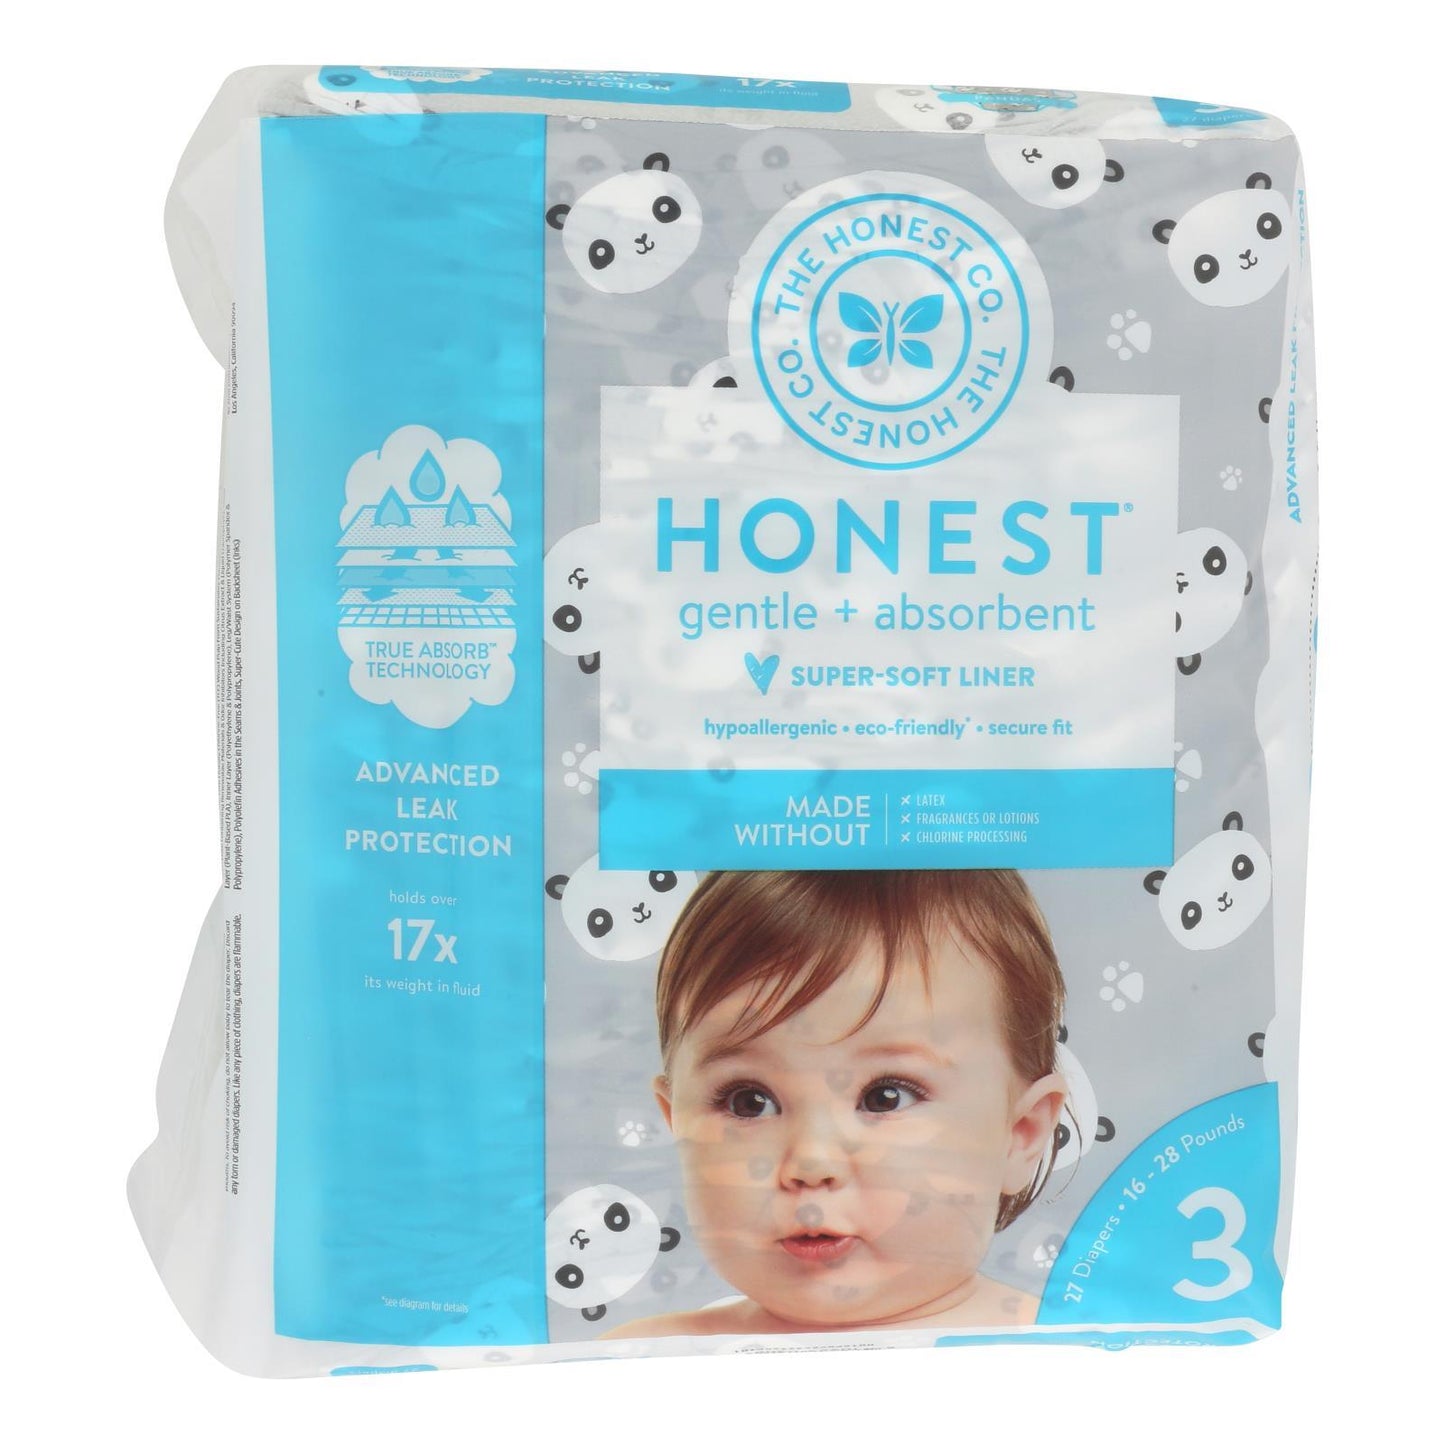 The Honest Company - Diapers Size 3 - Pandas - 27 Count